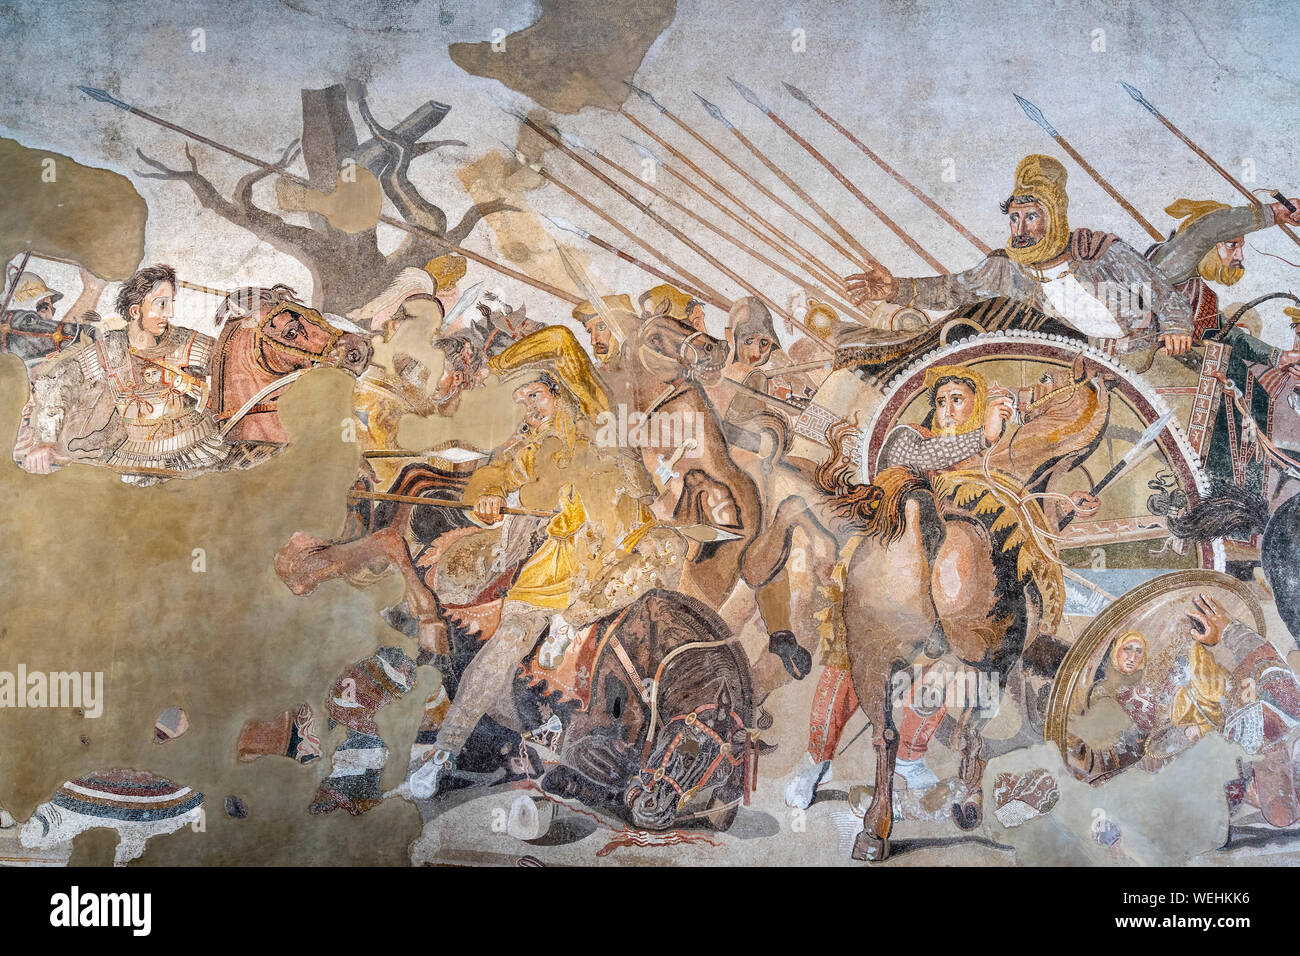 The Alexander the Great Mosaic Depicting the battle between Alexander and Darius III. Originally from the House of the Faun in Pompeii, now at at the Stock Photo